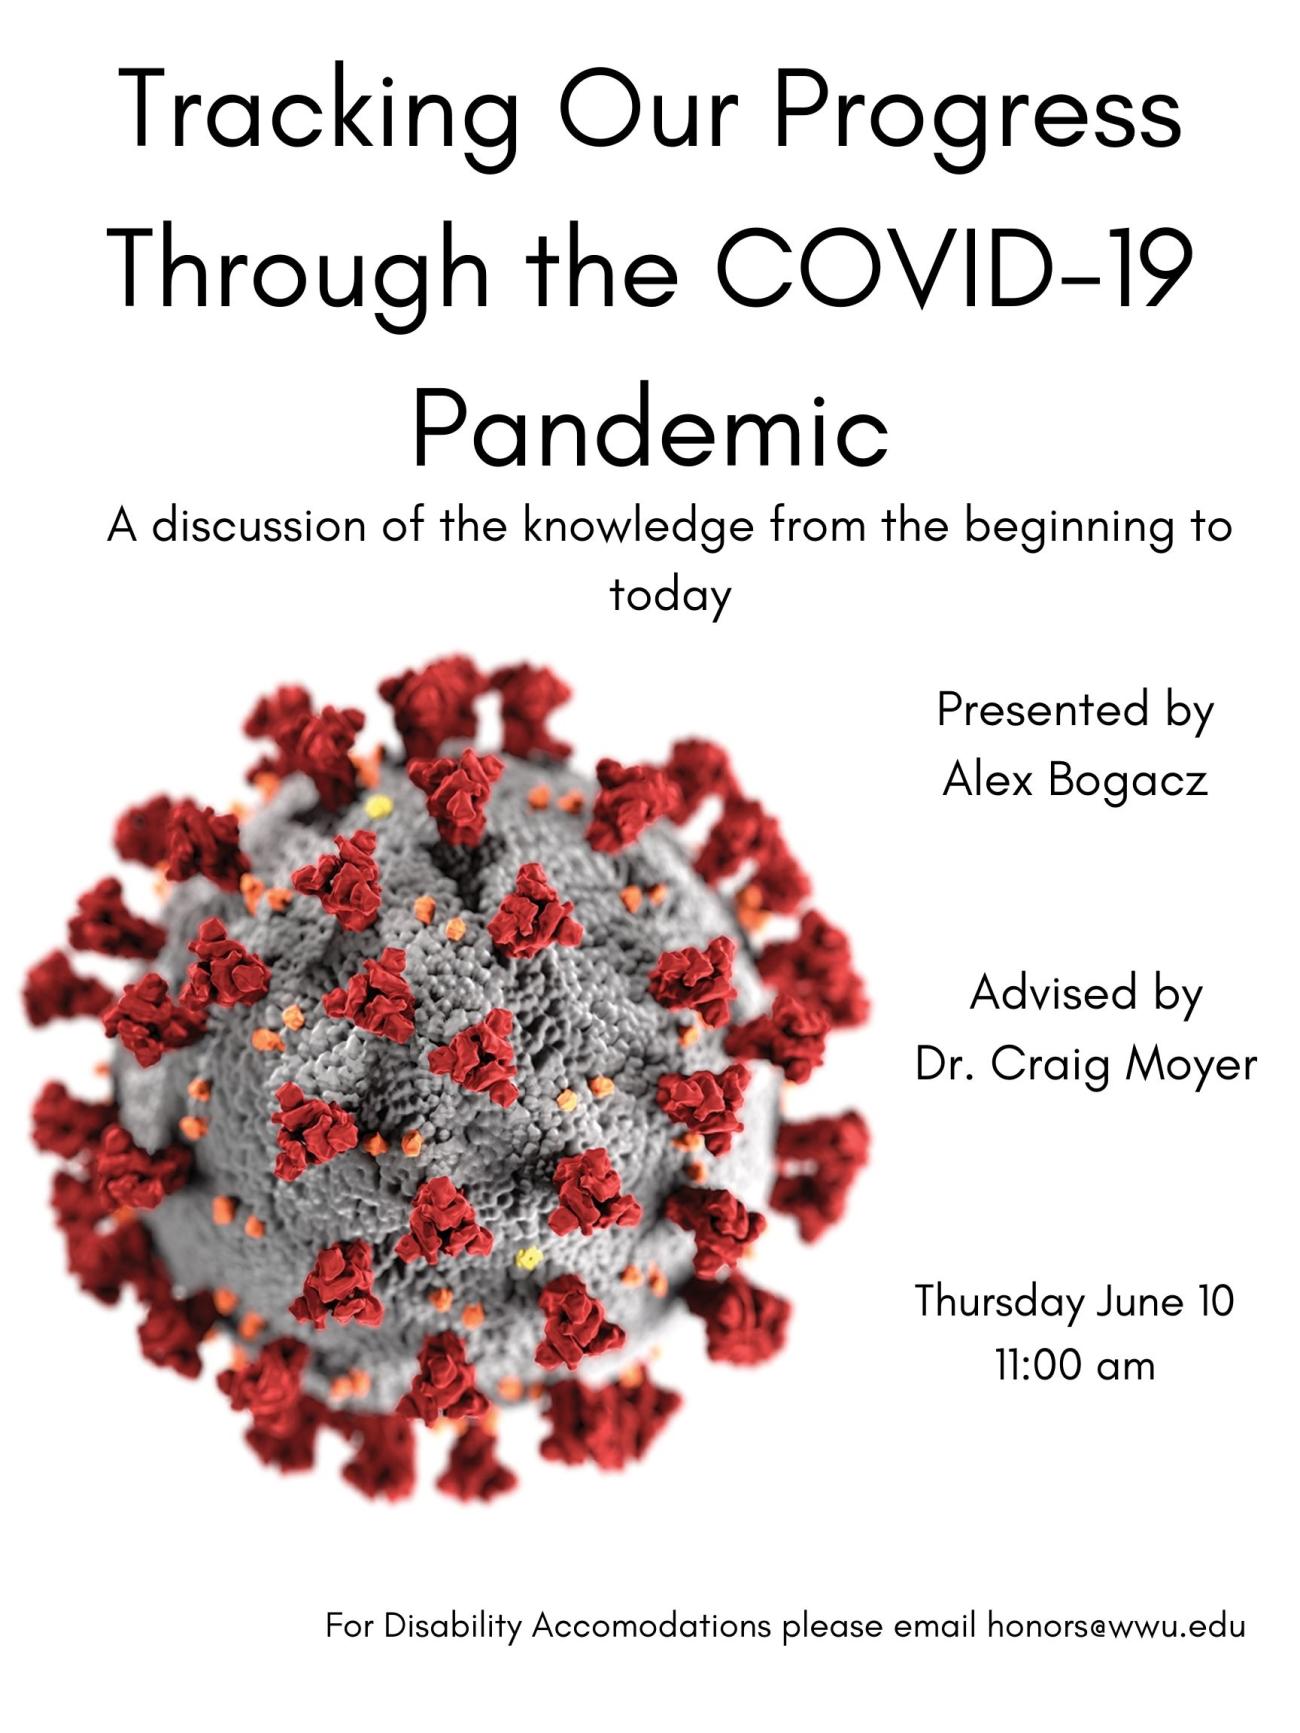 White poster with a blown-up image of the coronavirus responsible for the COVID-19 pandemic. Text reads: "Tracking Our Progress Through the COVID-19 Pandemic: a brief discussion of the knowledge from the beginning to today. Presented by Alex Bogacz, advised by Dr. Craig Moyer. Thursday June 10, 11:00 am. For disability accommodations please email honors@wwu.edu". 